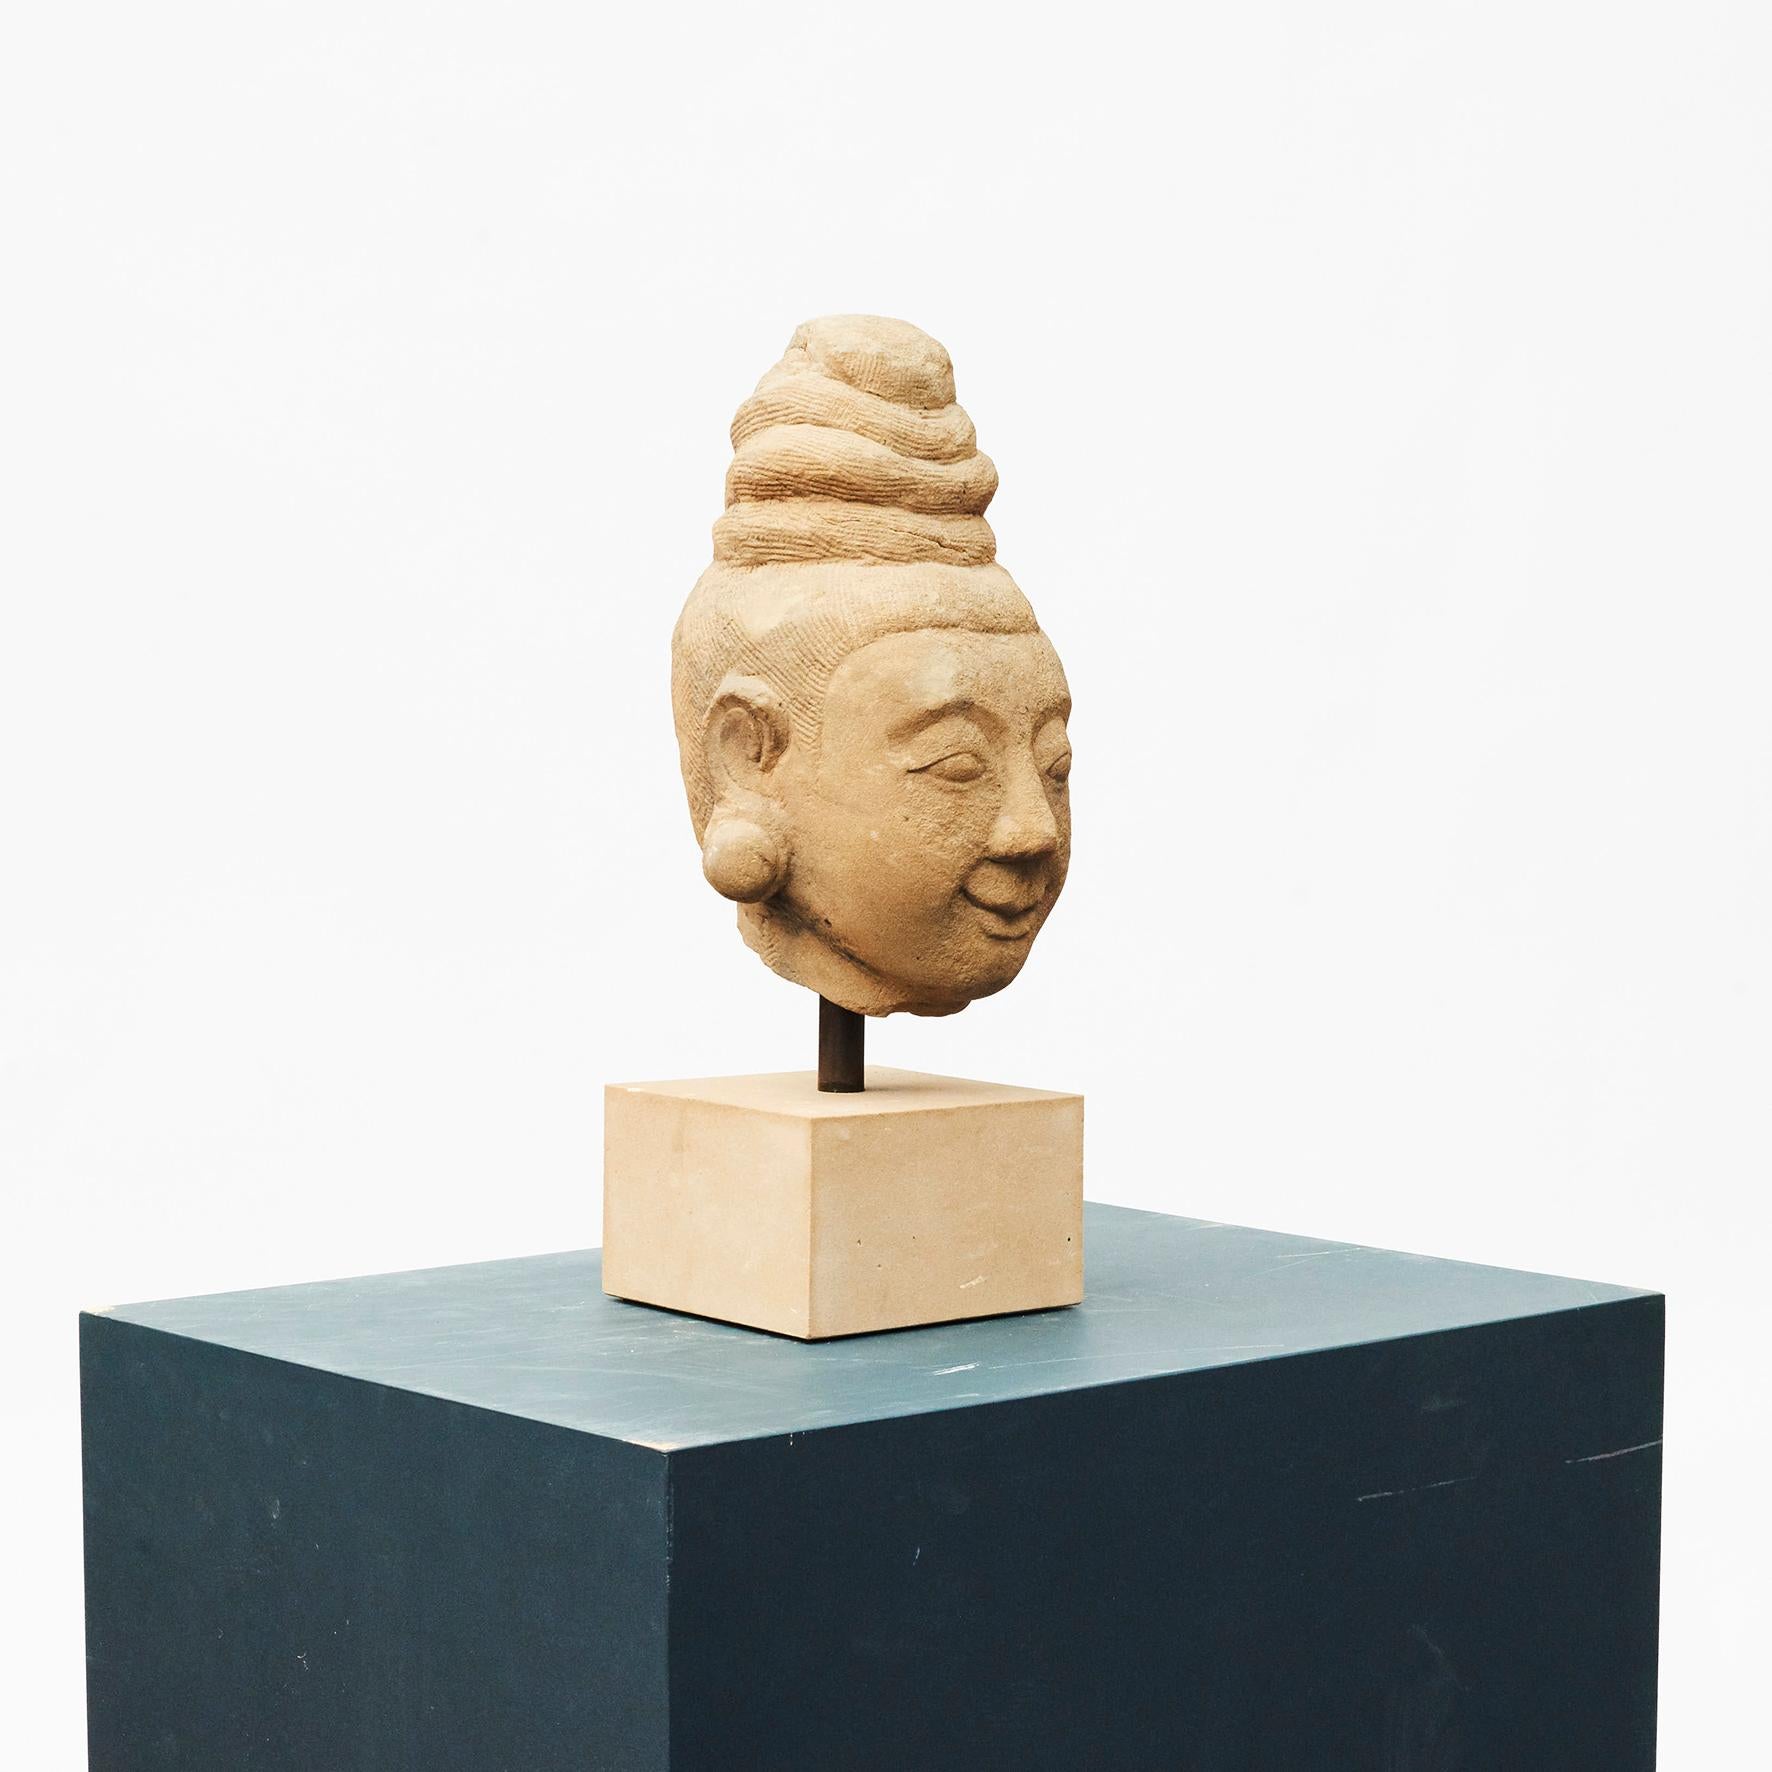 1600-1700th century sculpture of female head carved in sandstone.
Mounted on a base of light sandstone.
From pagoda / temple in Burma.

Charming expression with good patina.

Measures: Height head 33 cm - with base 46 cm.